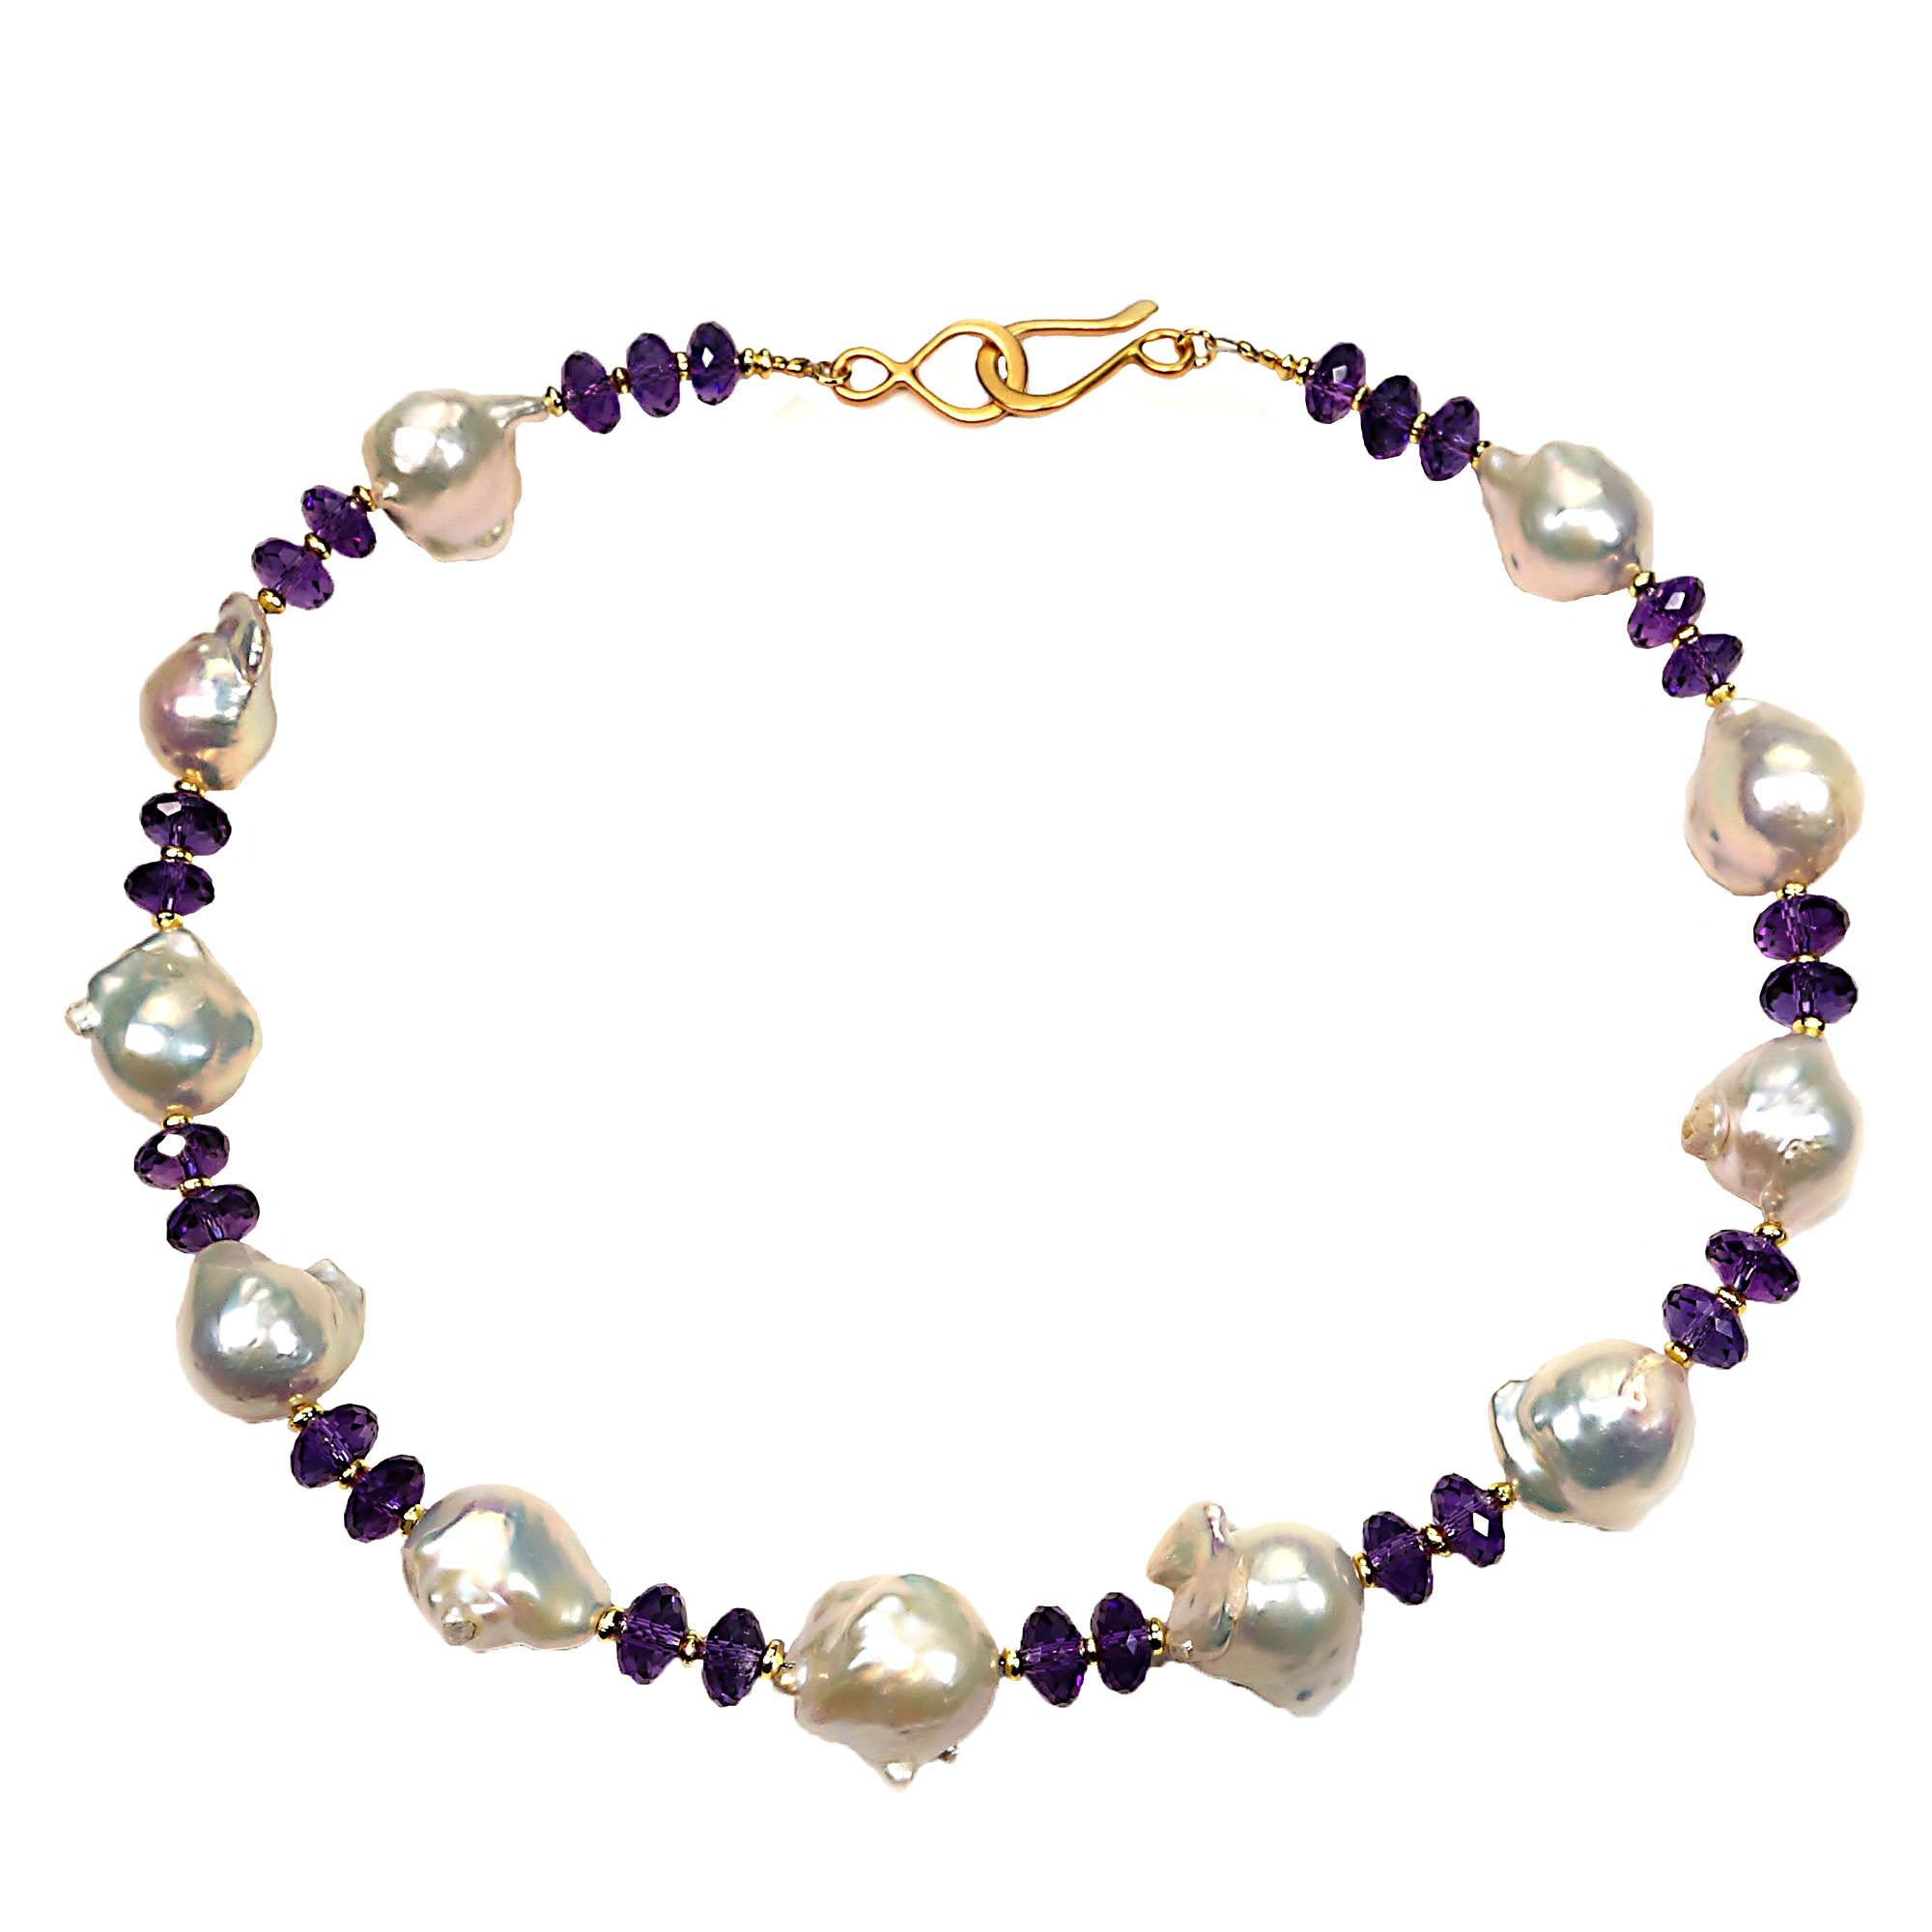 Artisan Gemjunky Sophisticated Purple Amethyst and White Baroque Pearl Choker Necklace